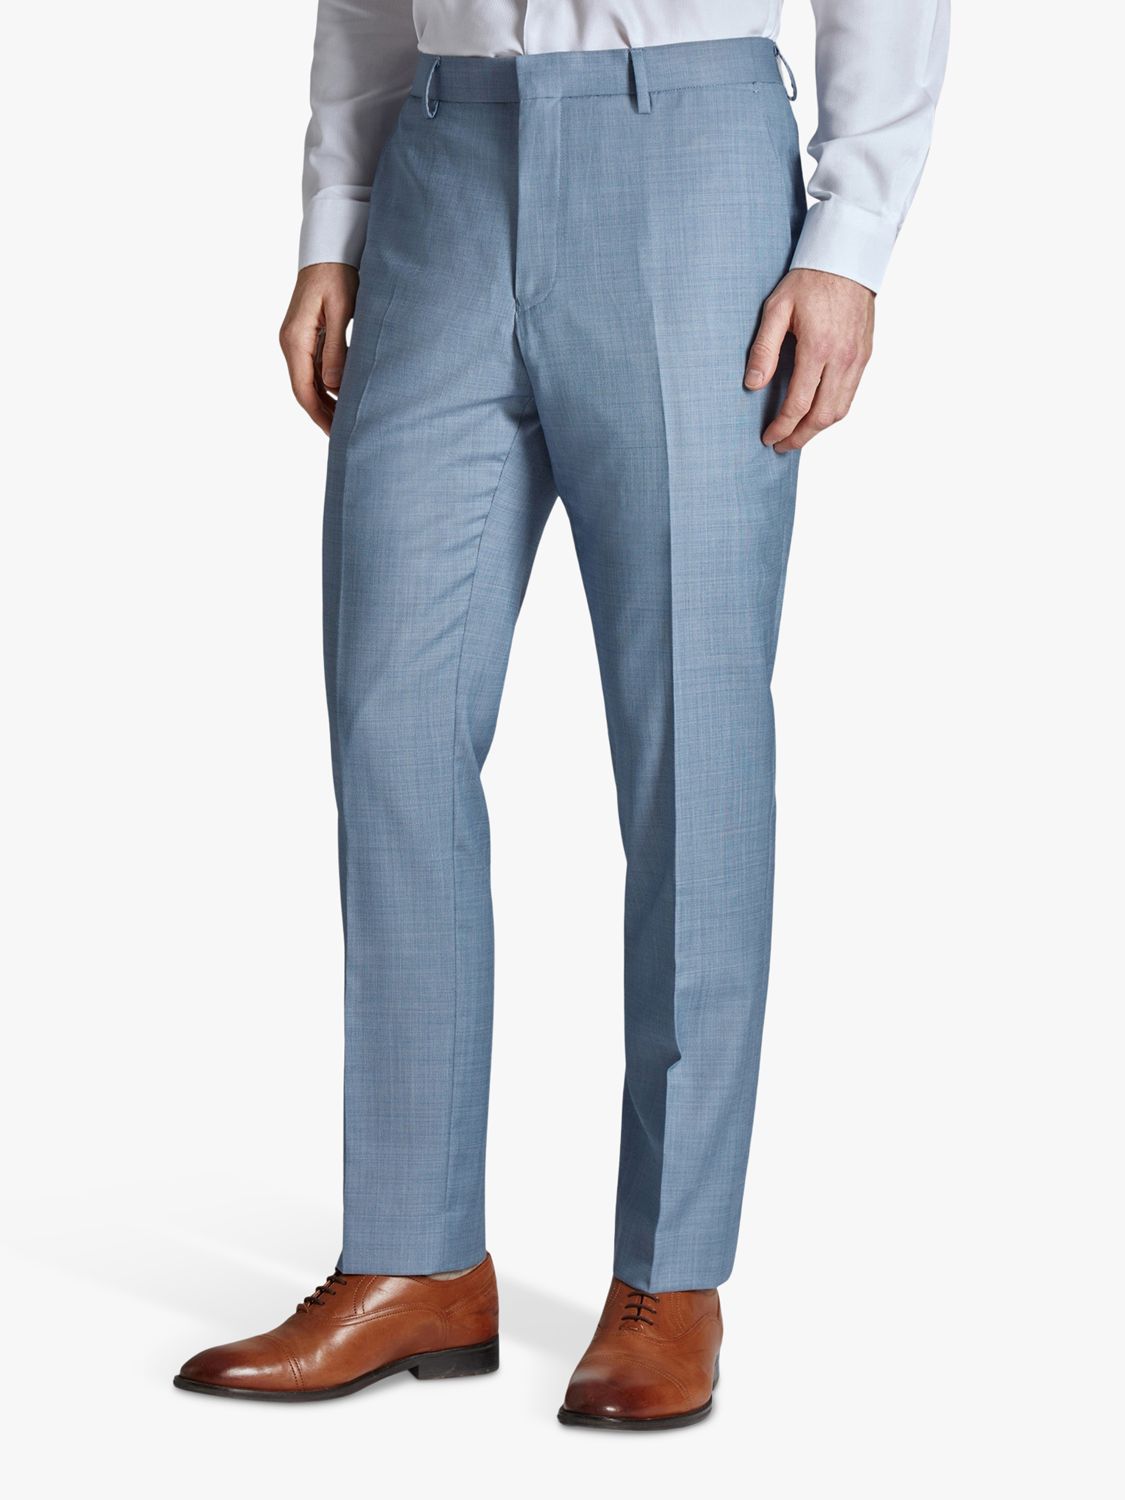 Buy Ted Baker Slim Fit Trousers, Blue Online at johnlewis.com